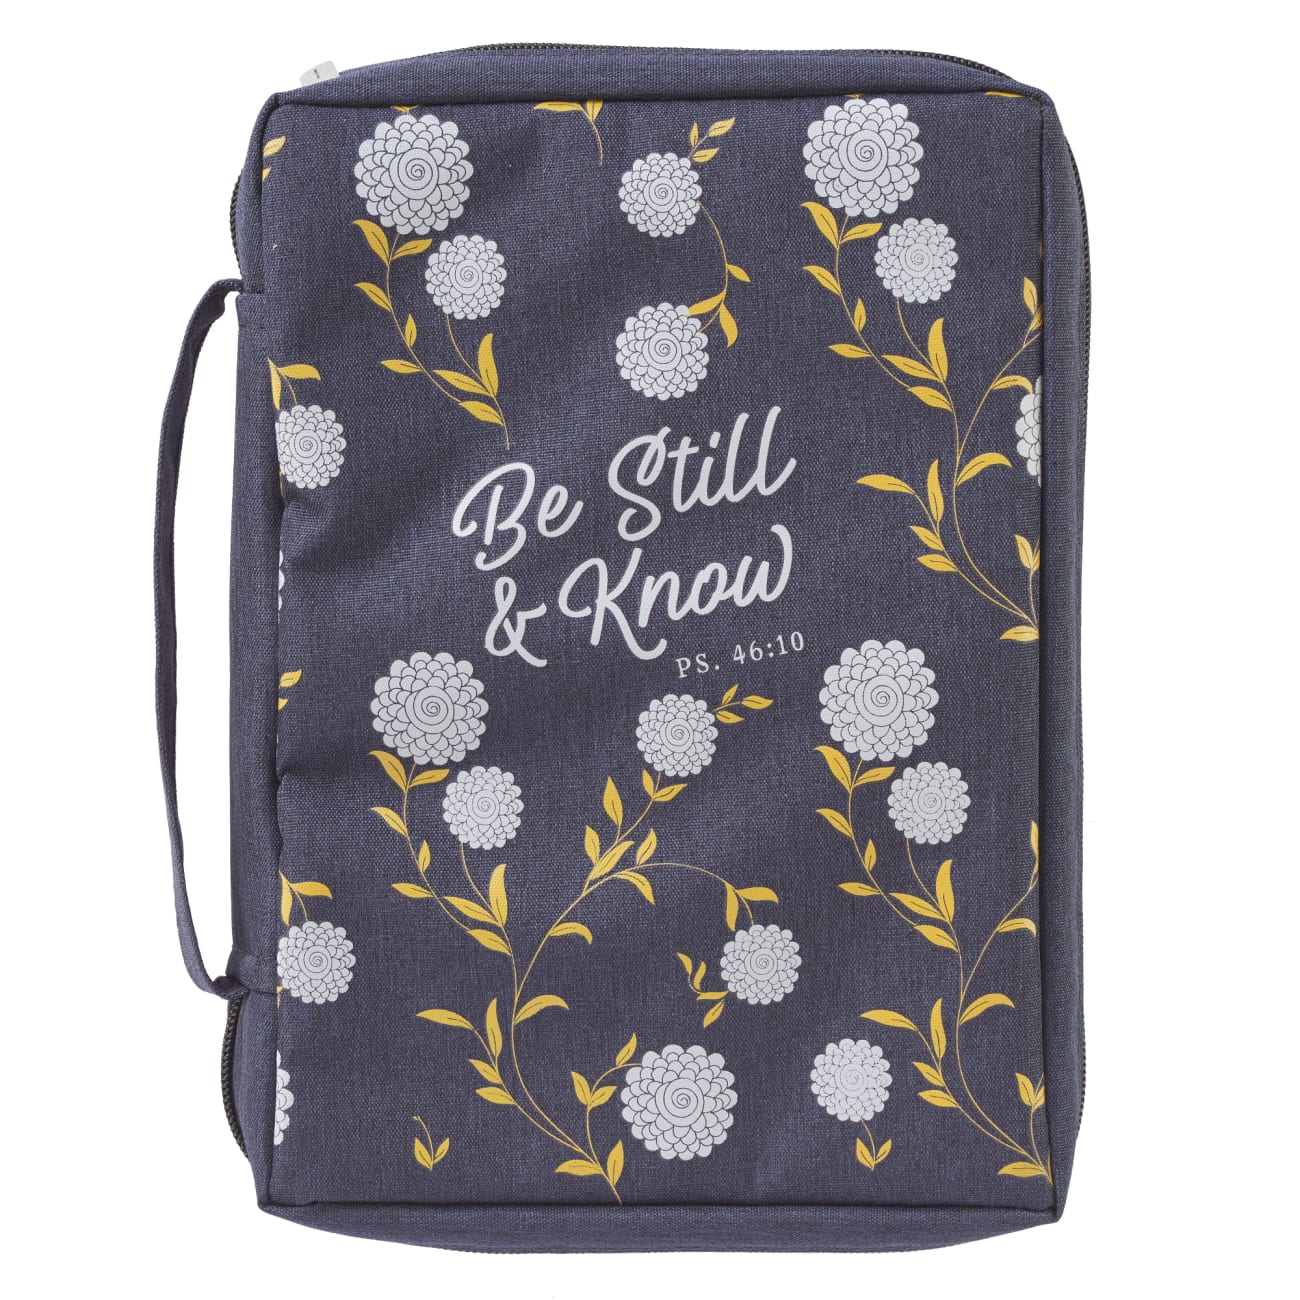 Bible Cover Poly Canvas Medium: Be Still & Know, Navy/White Cotton Flowers, Carry Handle Bible Cover